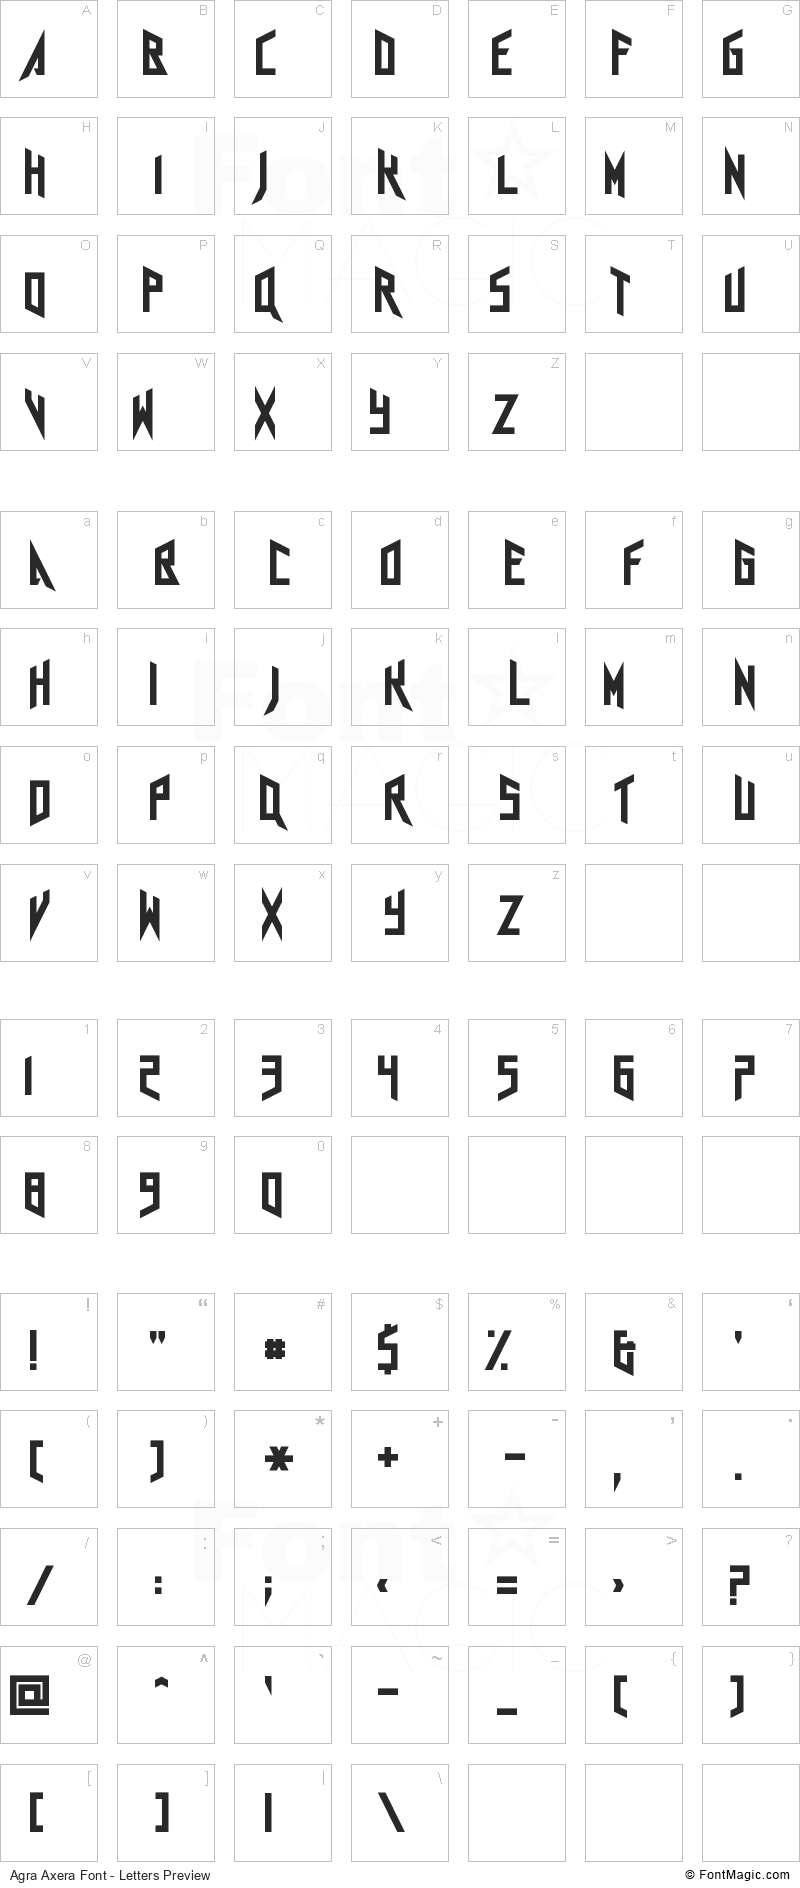 Agra Axera Font - All Latters Preview Chart